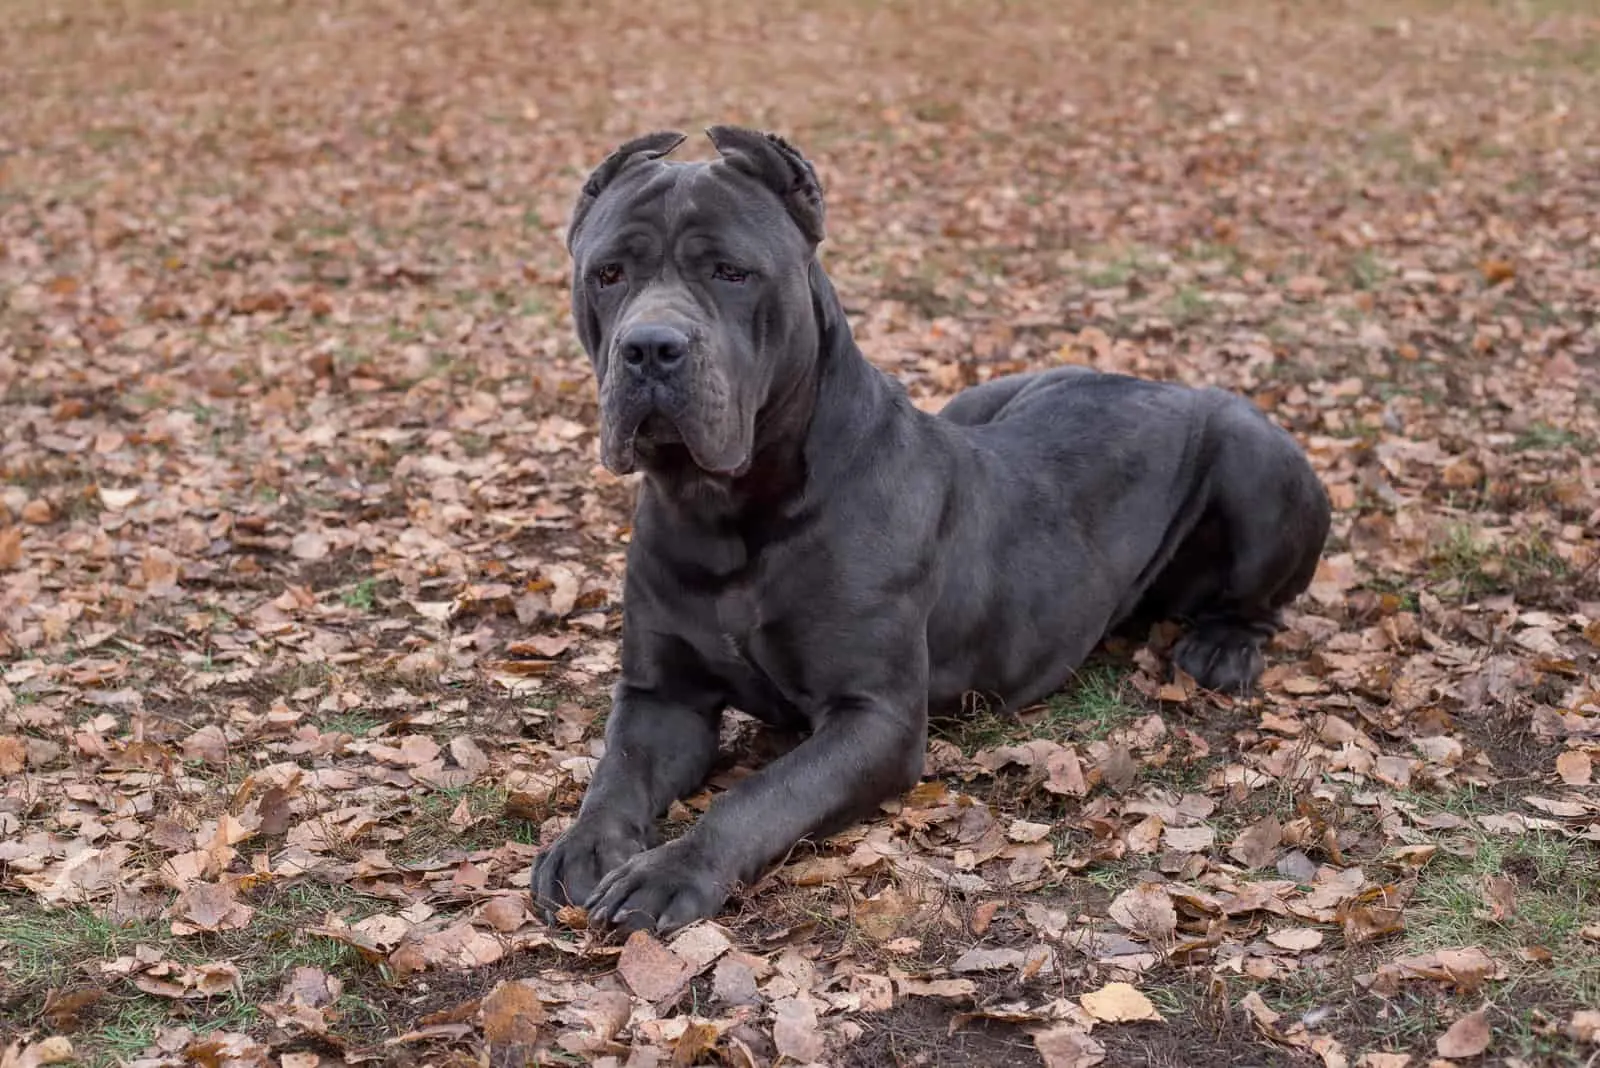 Formidable cane corso is lying on orange leaves in the autumn park